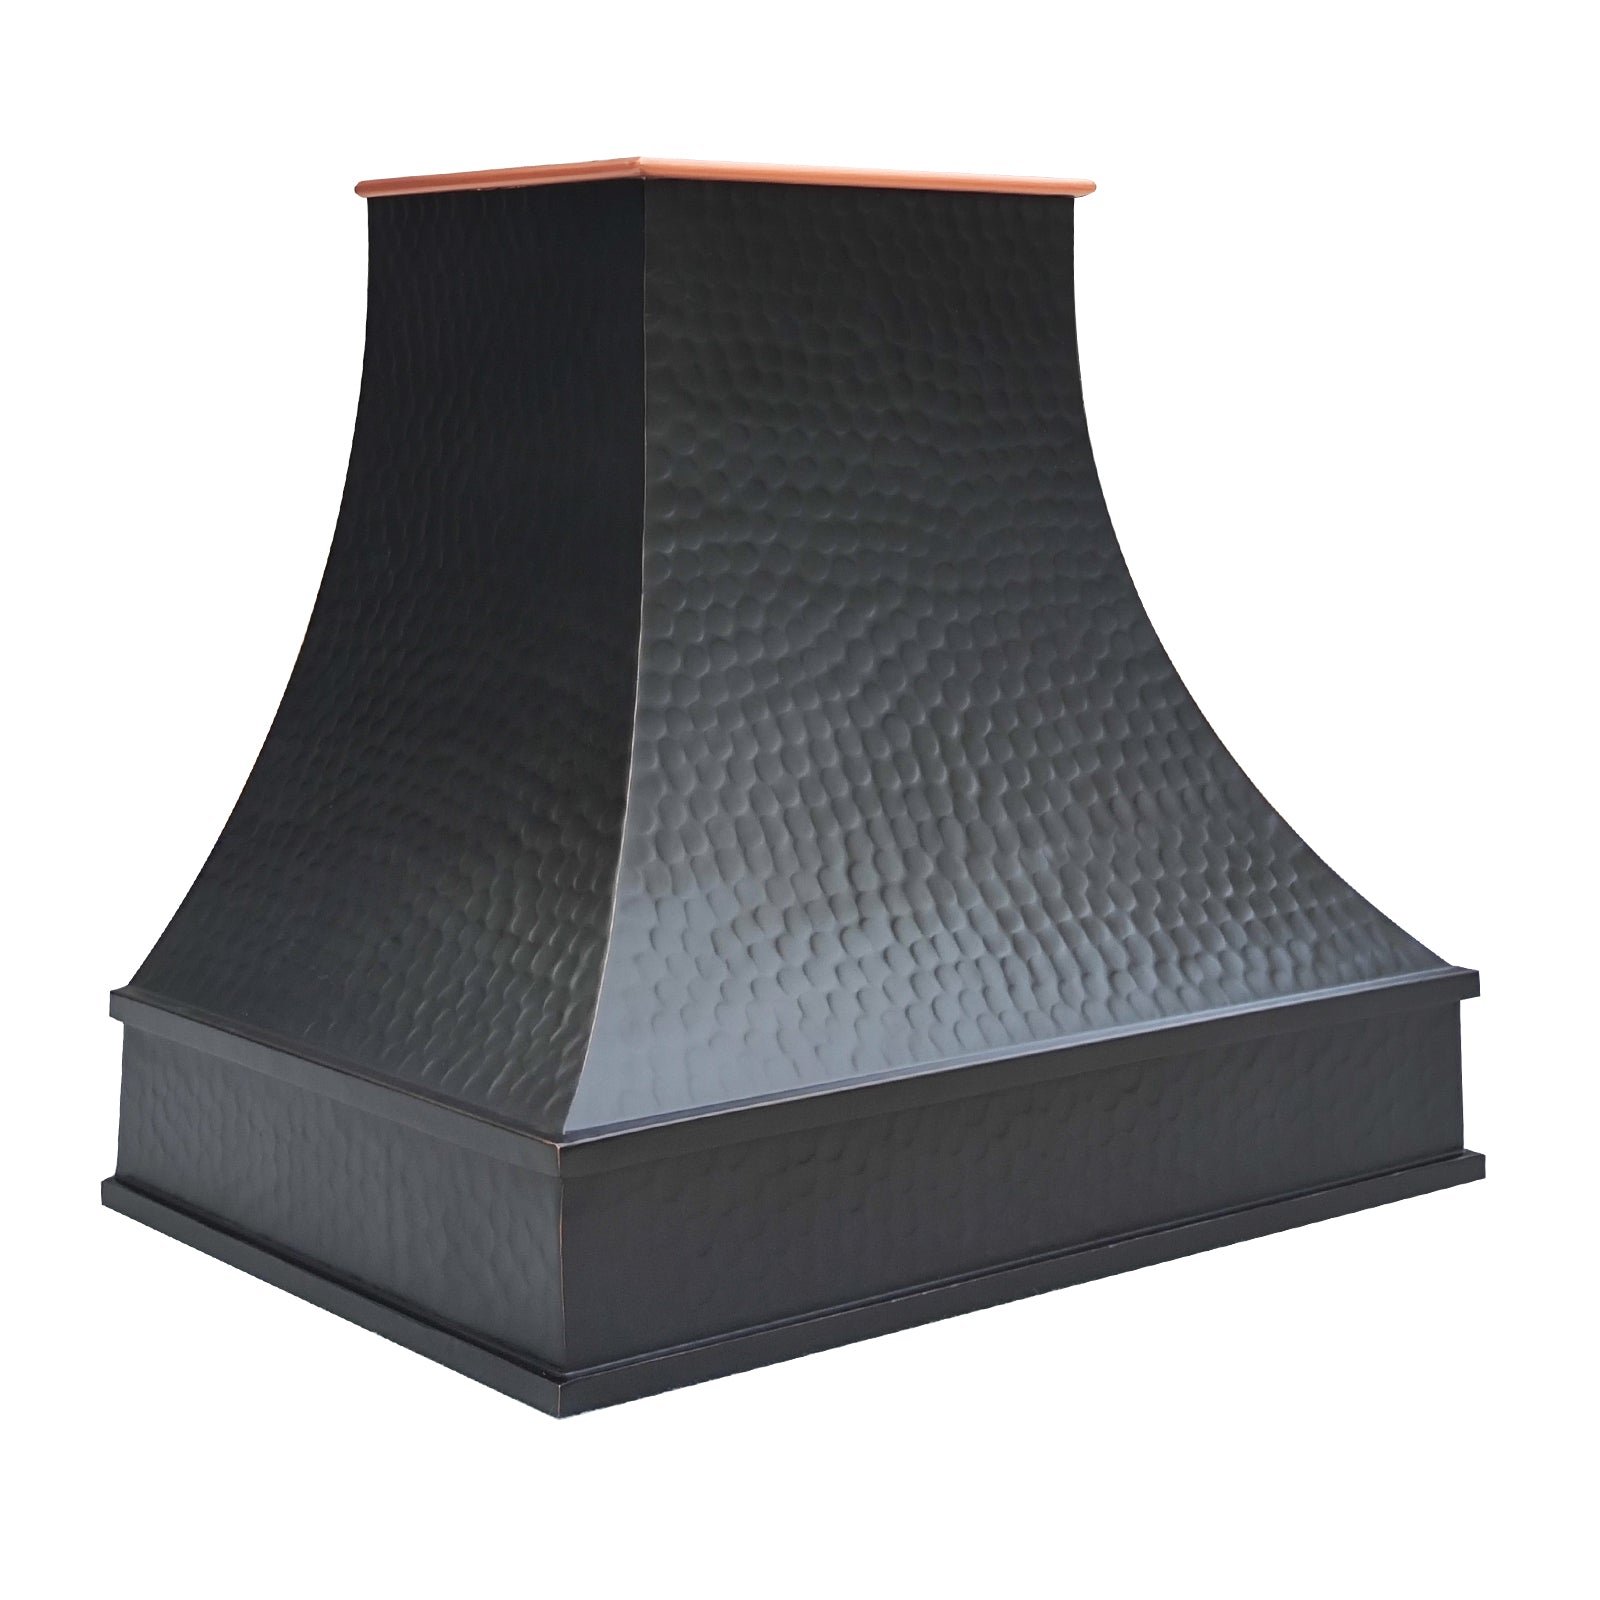 Fobest Custom Bronze Copper Range Hood with natural copper crown FCP-128 - Fobest Appliance